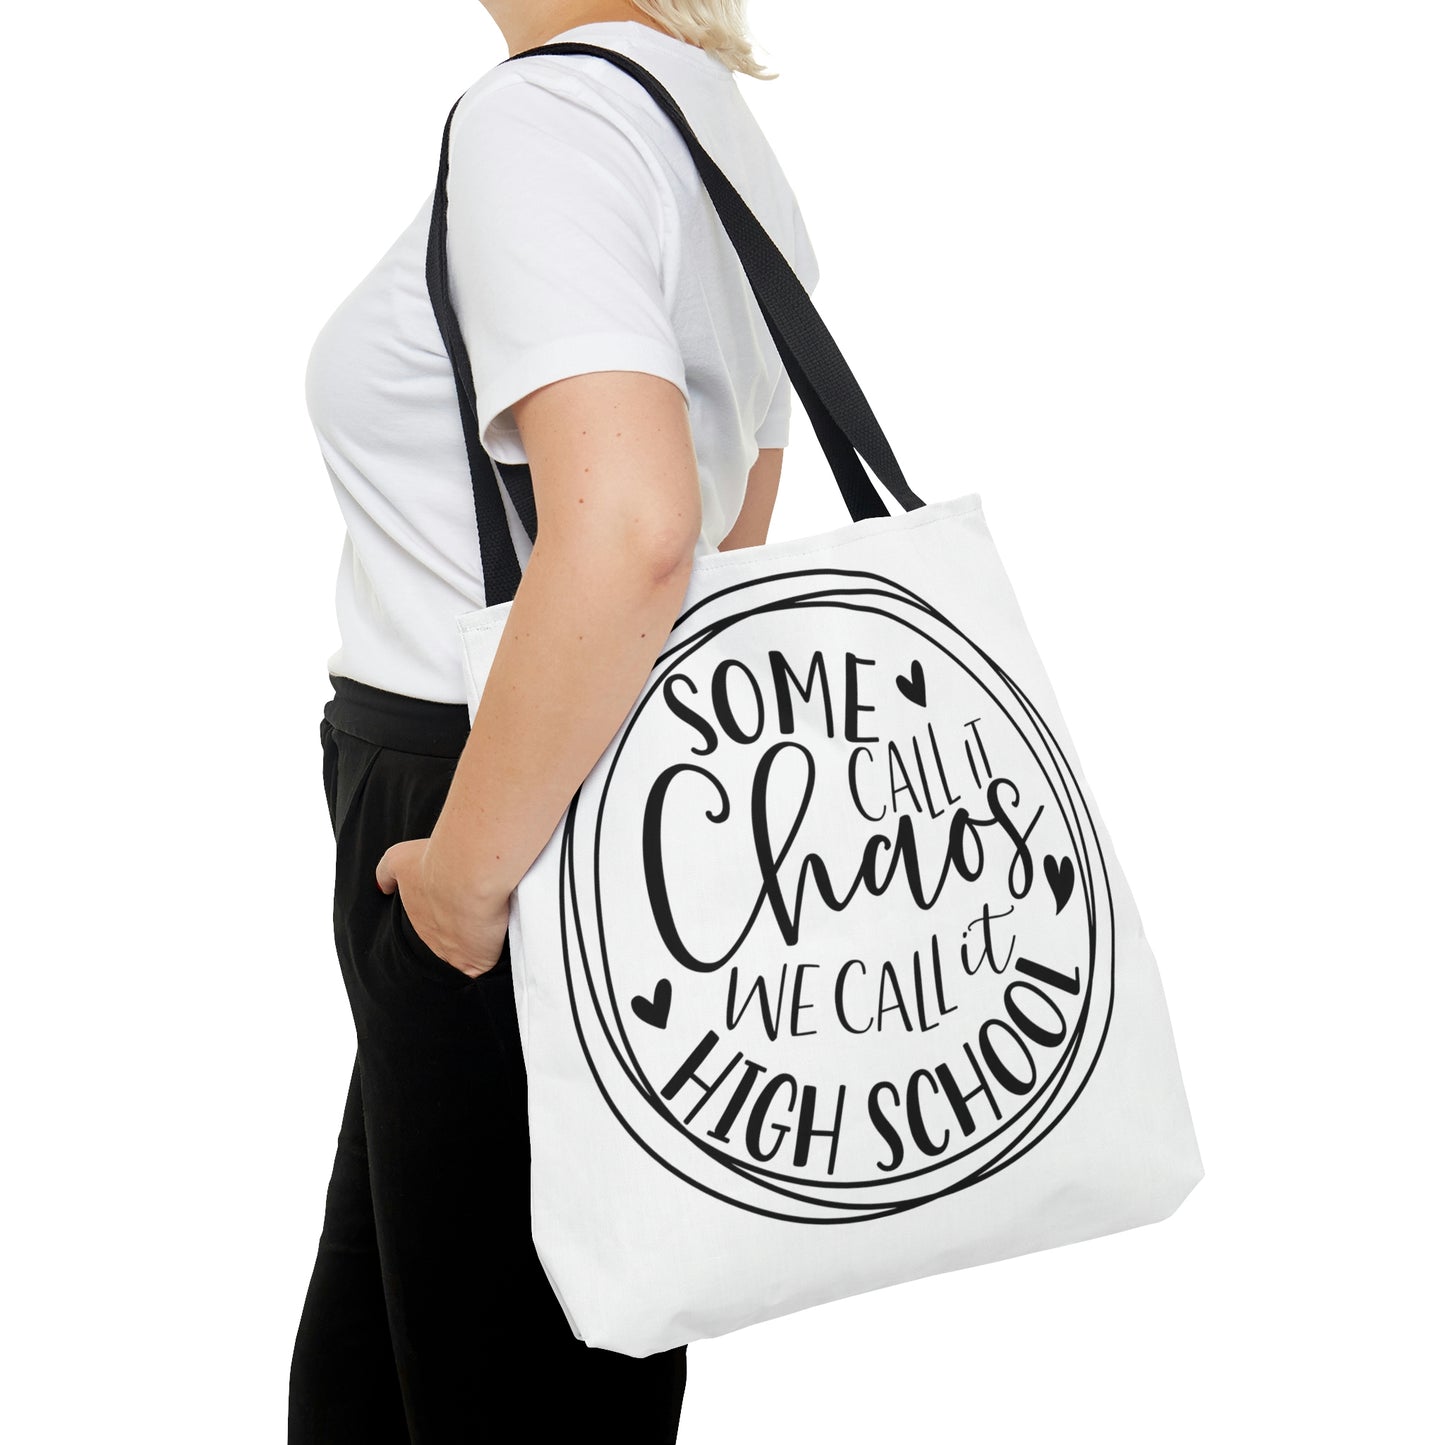 "Some Call It Chaos We Call It High School" tote bag